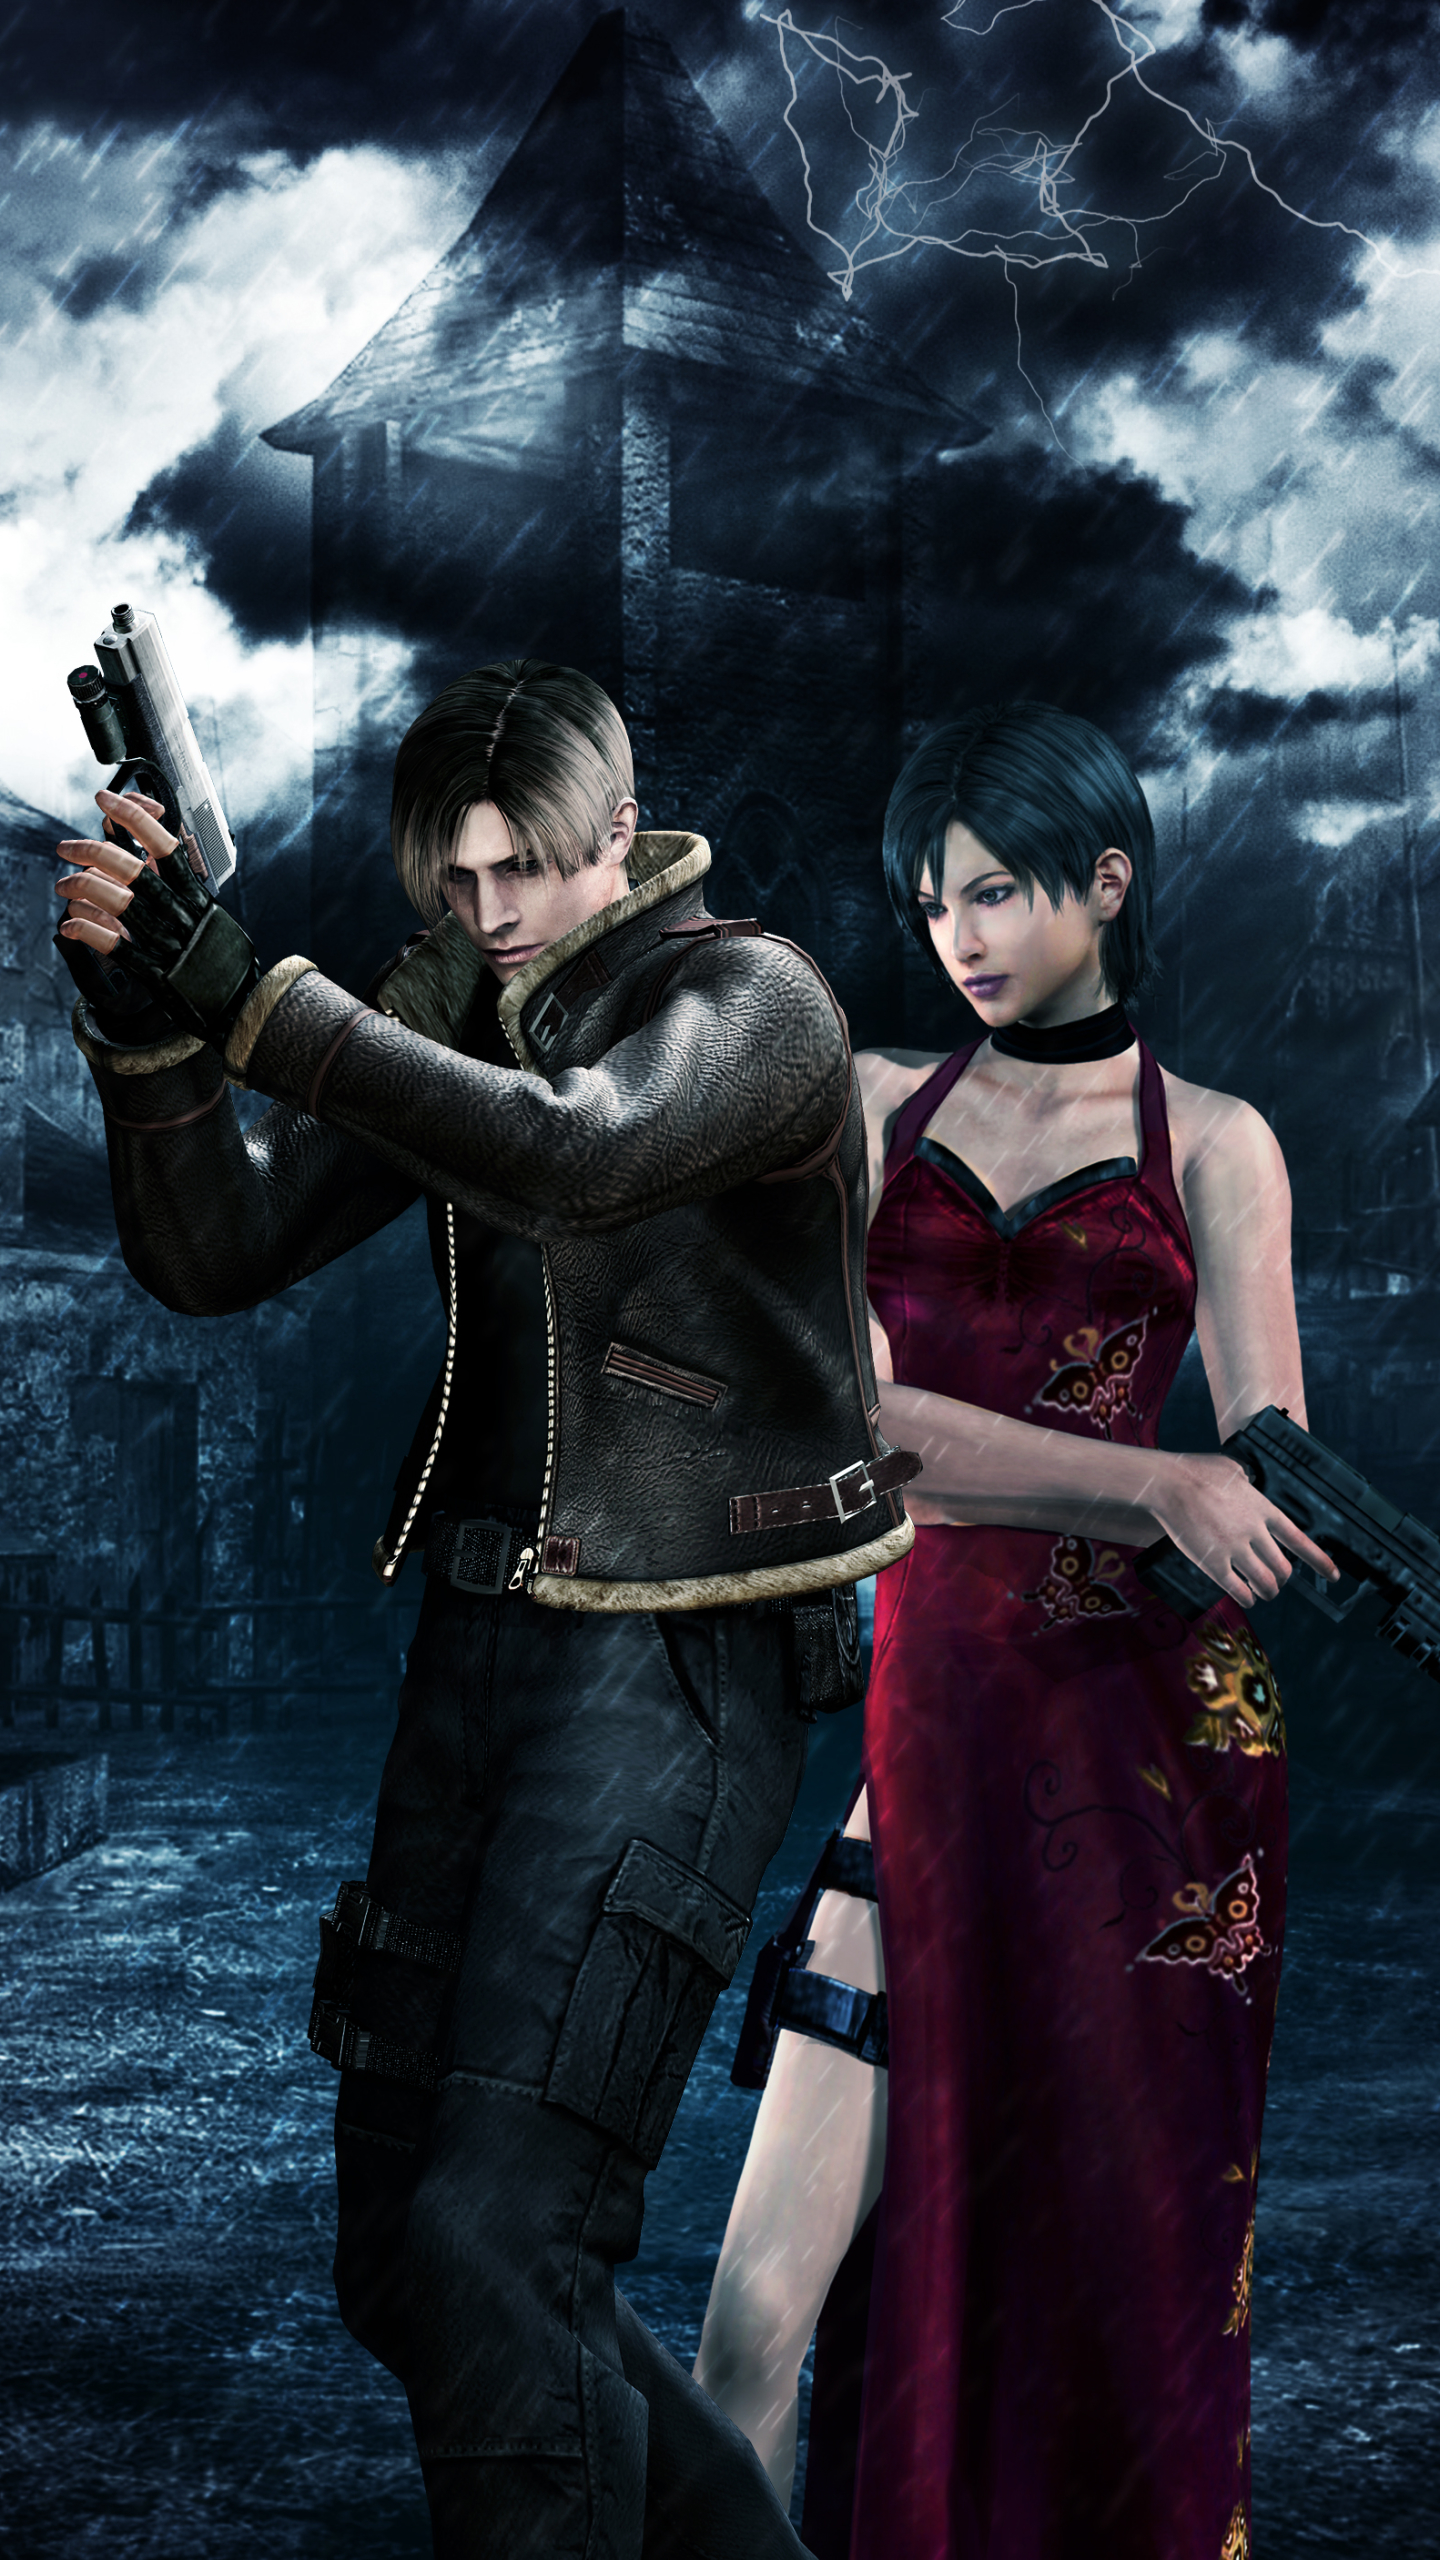 Ashley Resident Evil 4 Wallpapers - Top Free Ashley Resident Evil 4  Backgrounds - WallpaperAccess